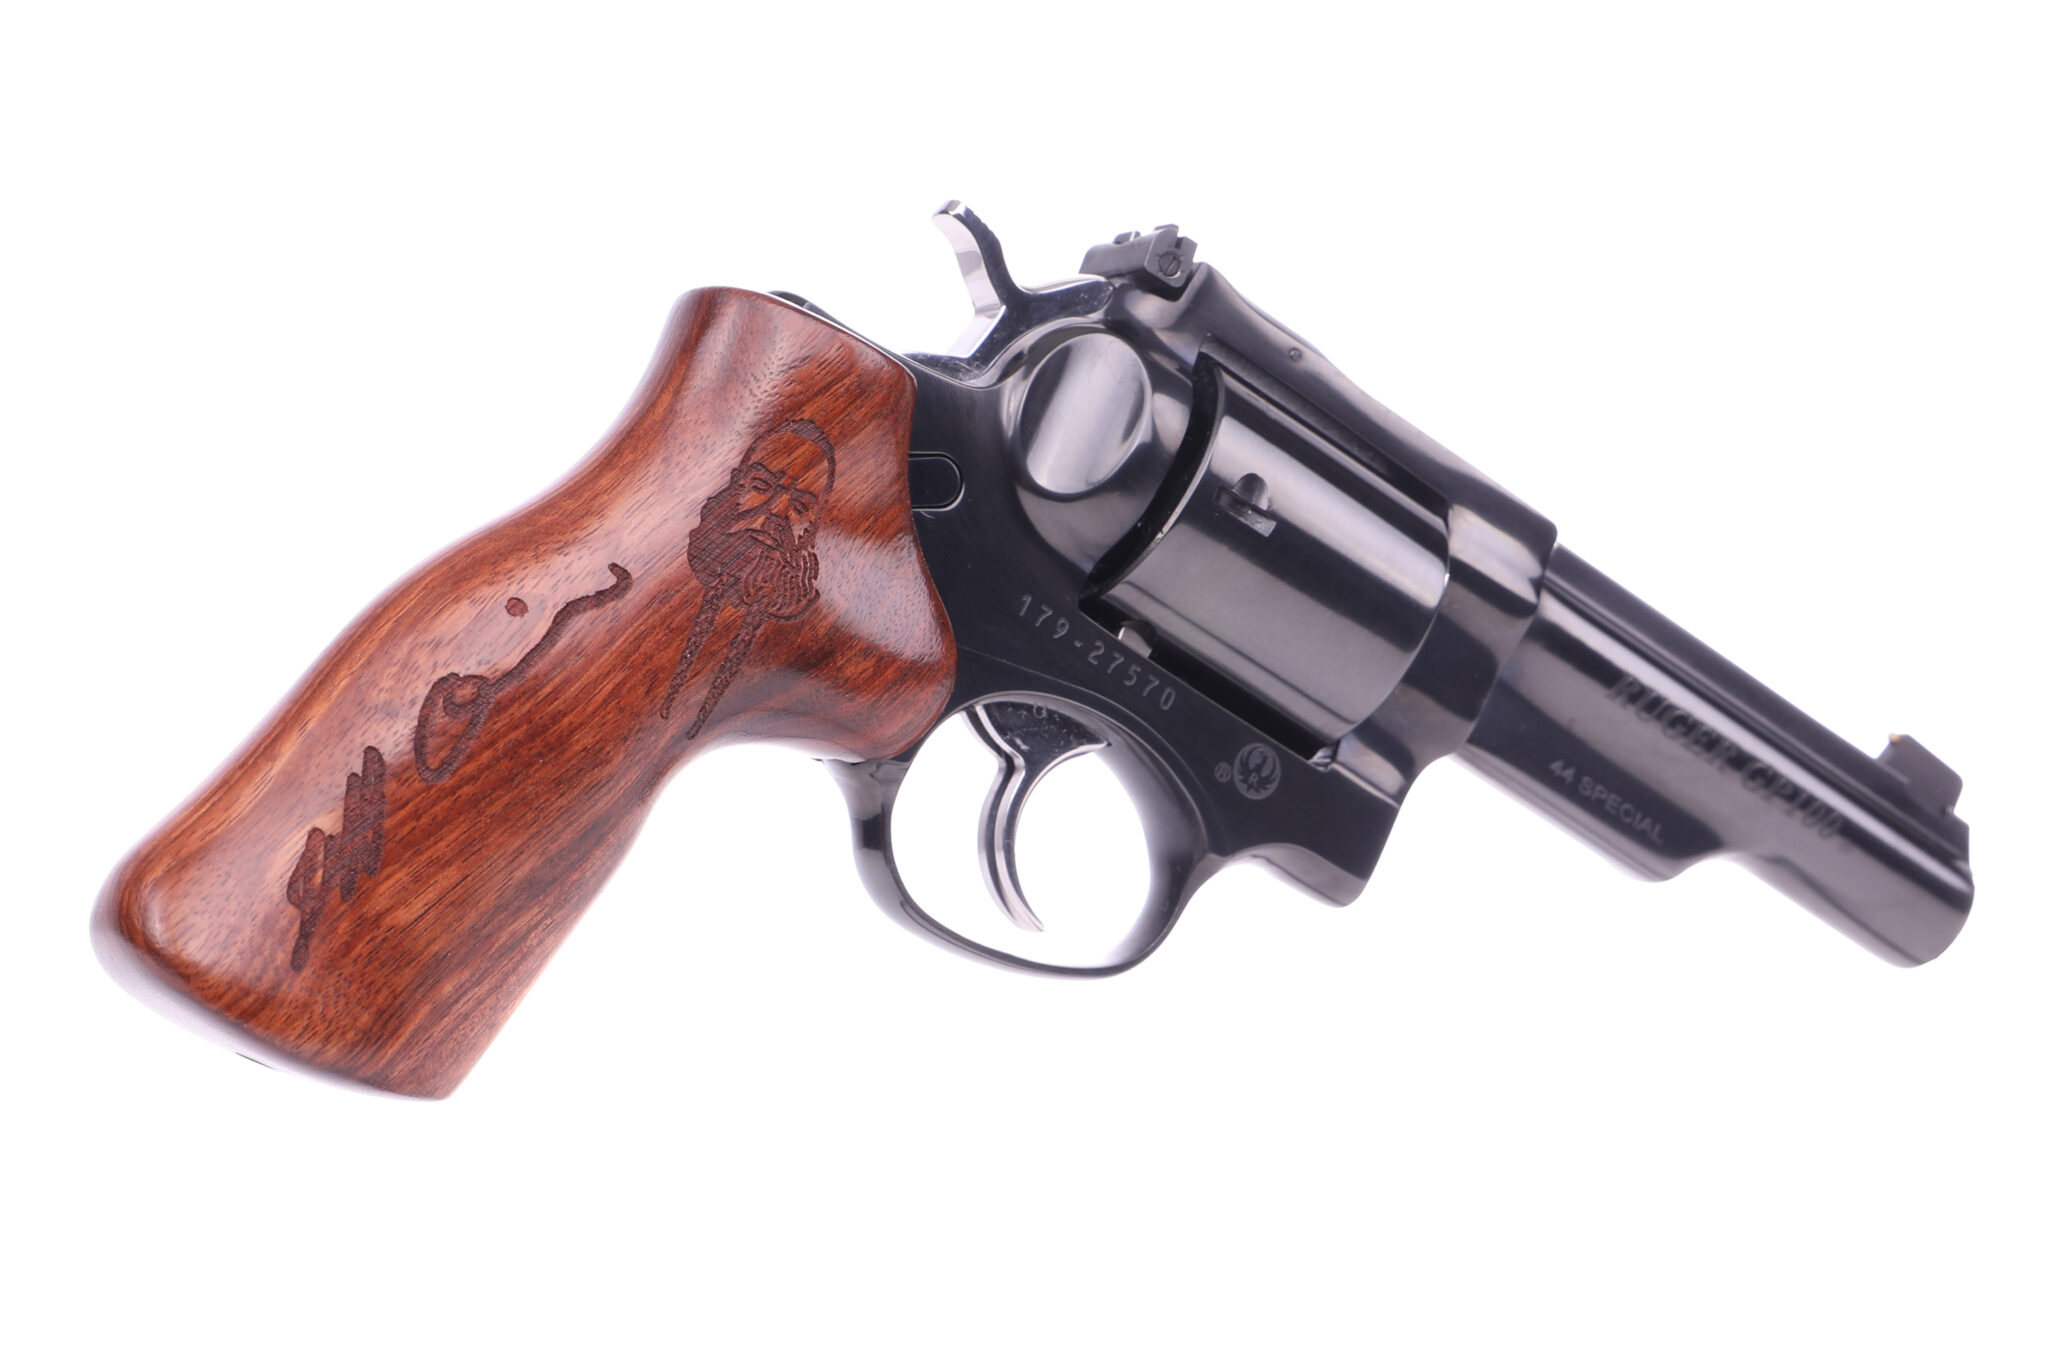 Lipsey's Guns - Home Of Lipsey's Exclusive Firearms